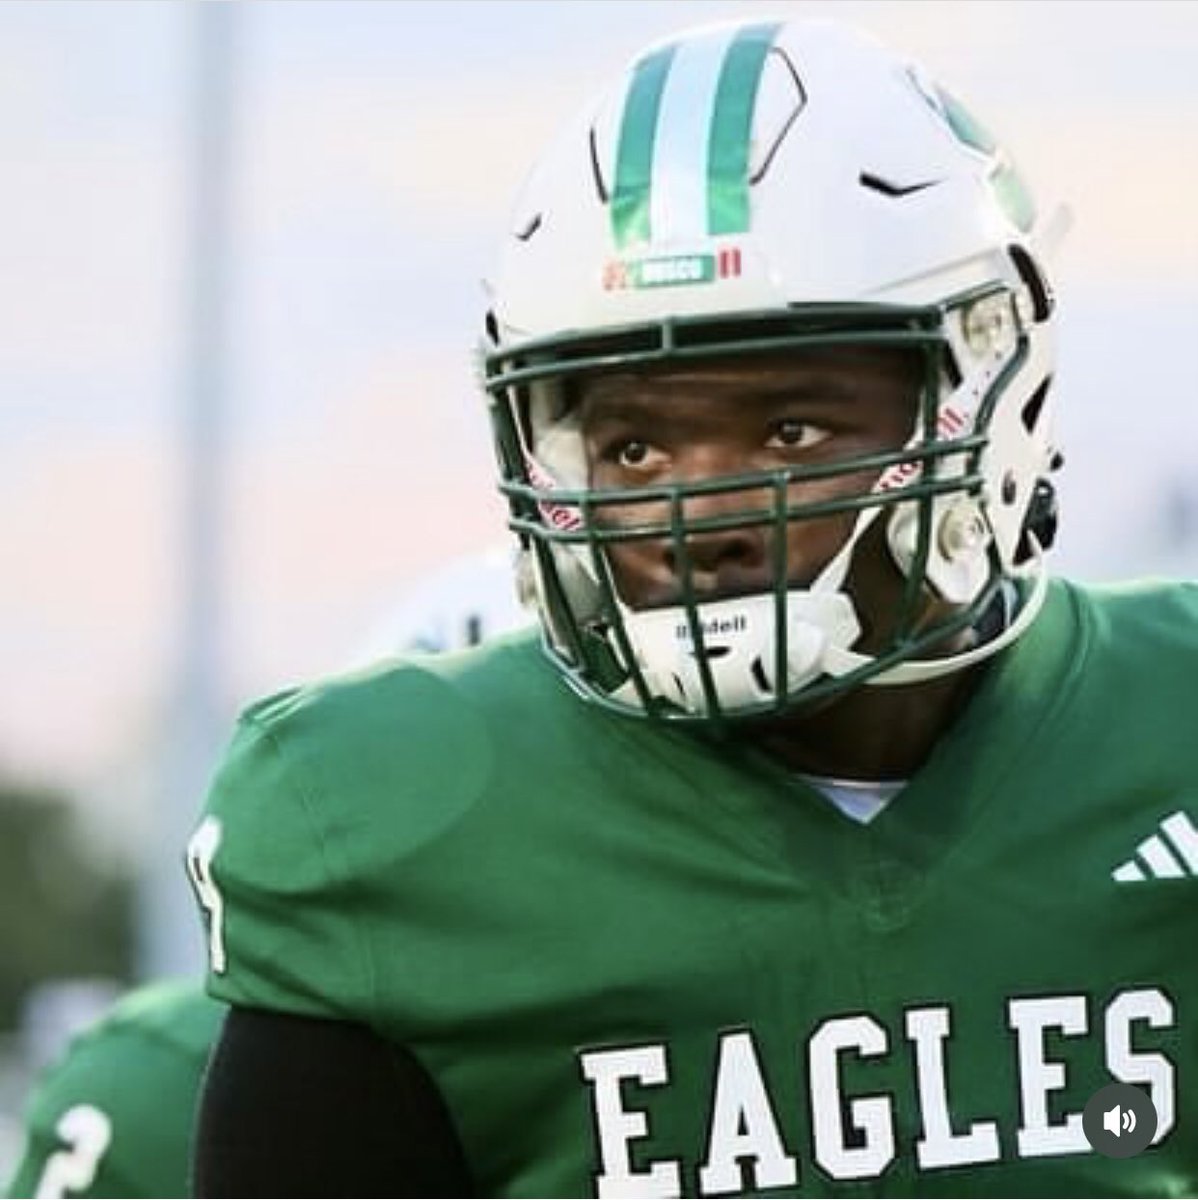 Archbishop Shaw’s DE @Jaylscott99 has decommitted from Tulane. Now the question is, which school will he choose next?